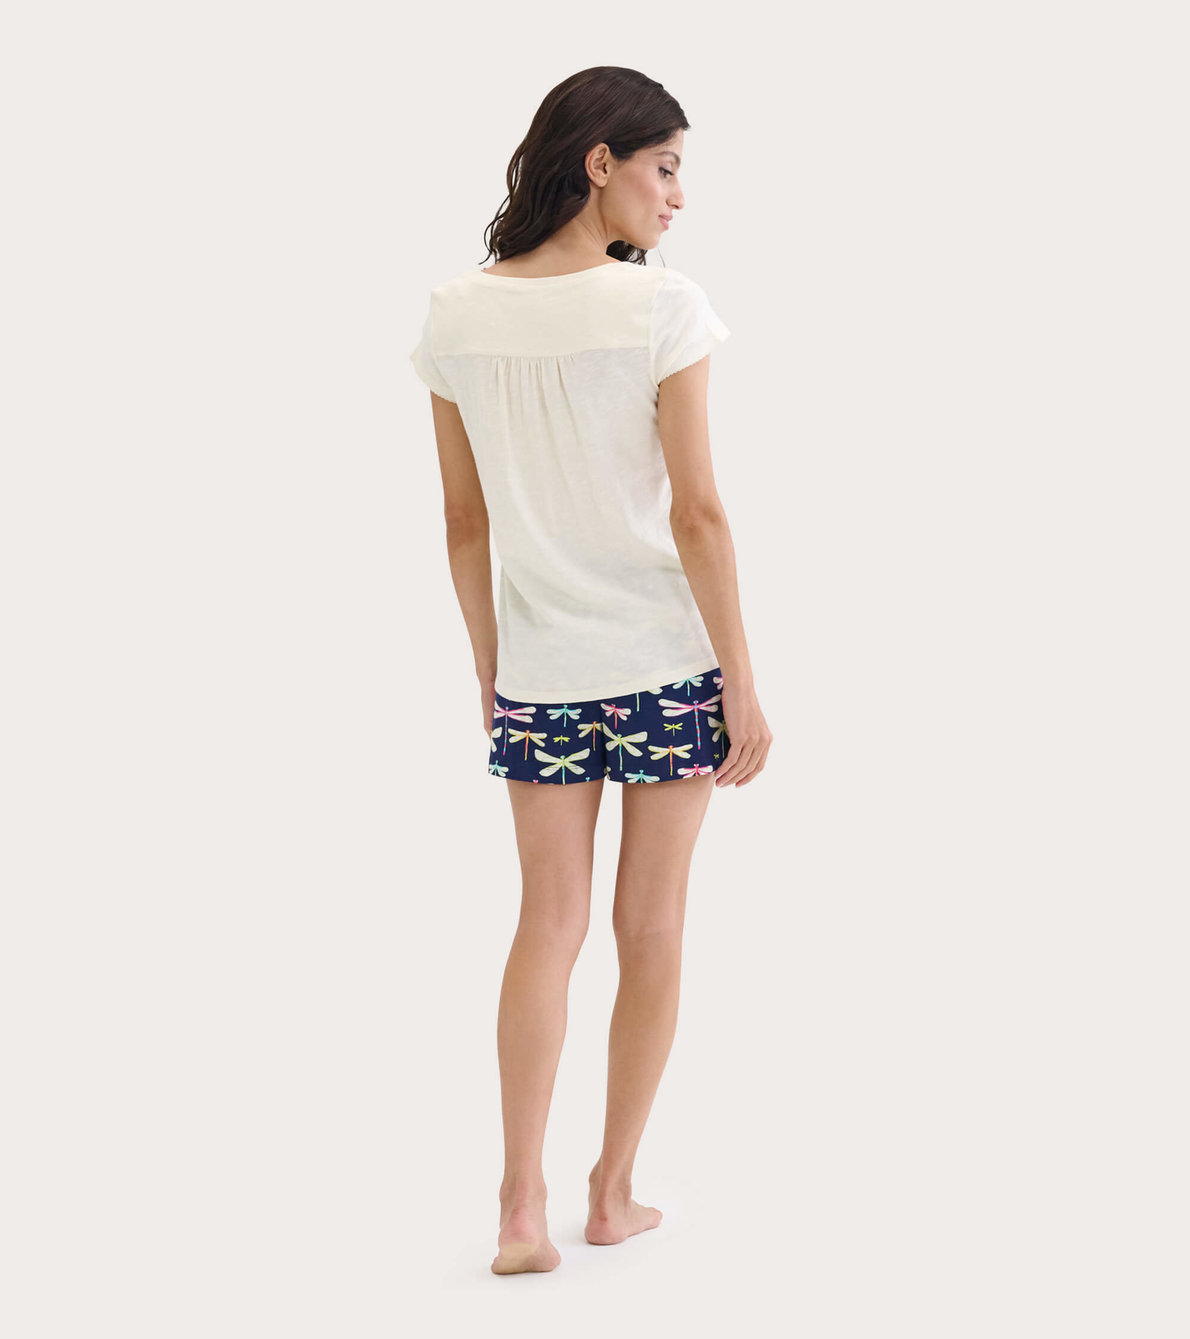 View larger image of Dragonflies Women's Sleep Shorts